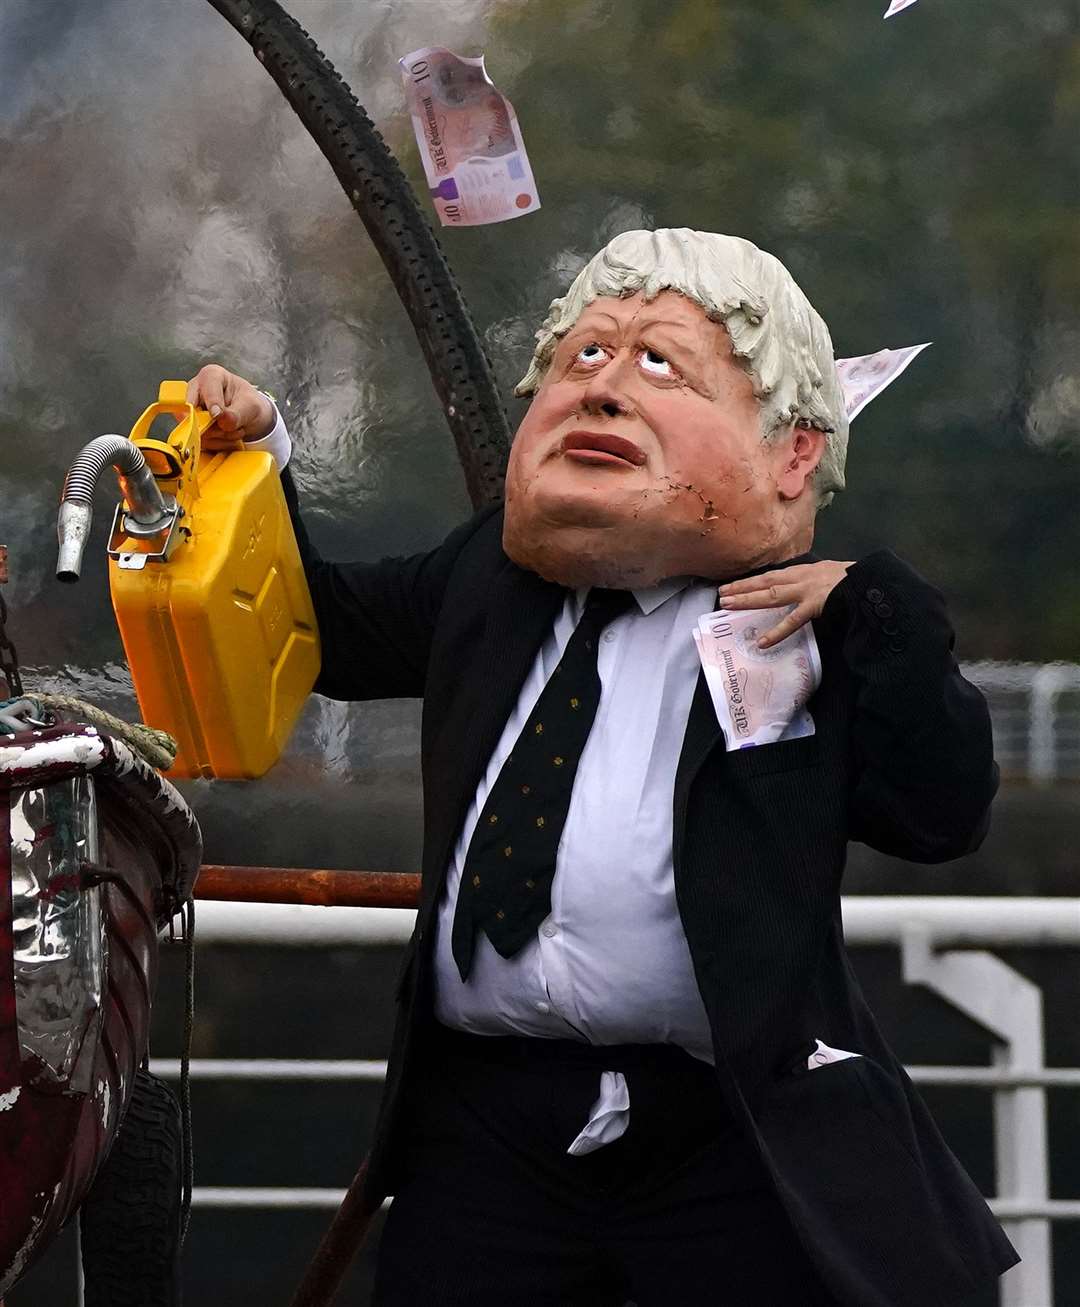 One protester was dressed up as Boris Johnson for the stunt (Andrew Milligan/PA)